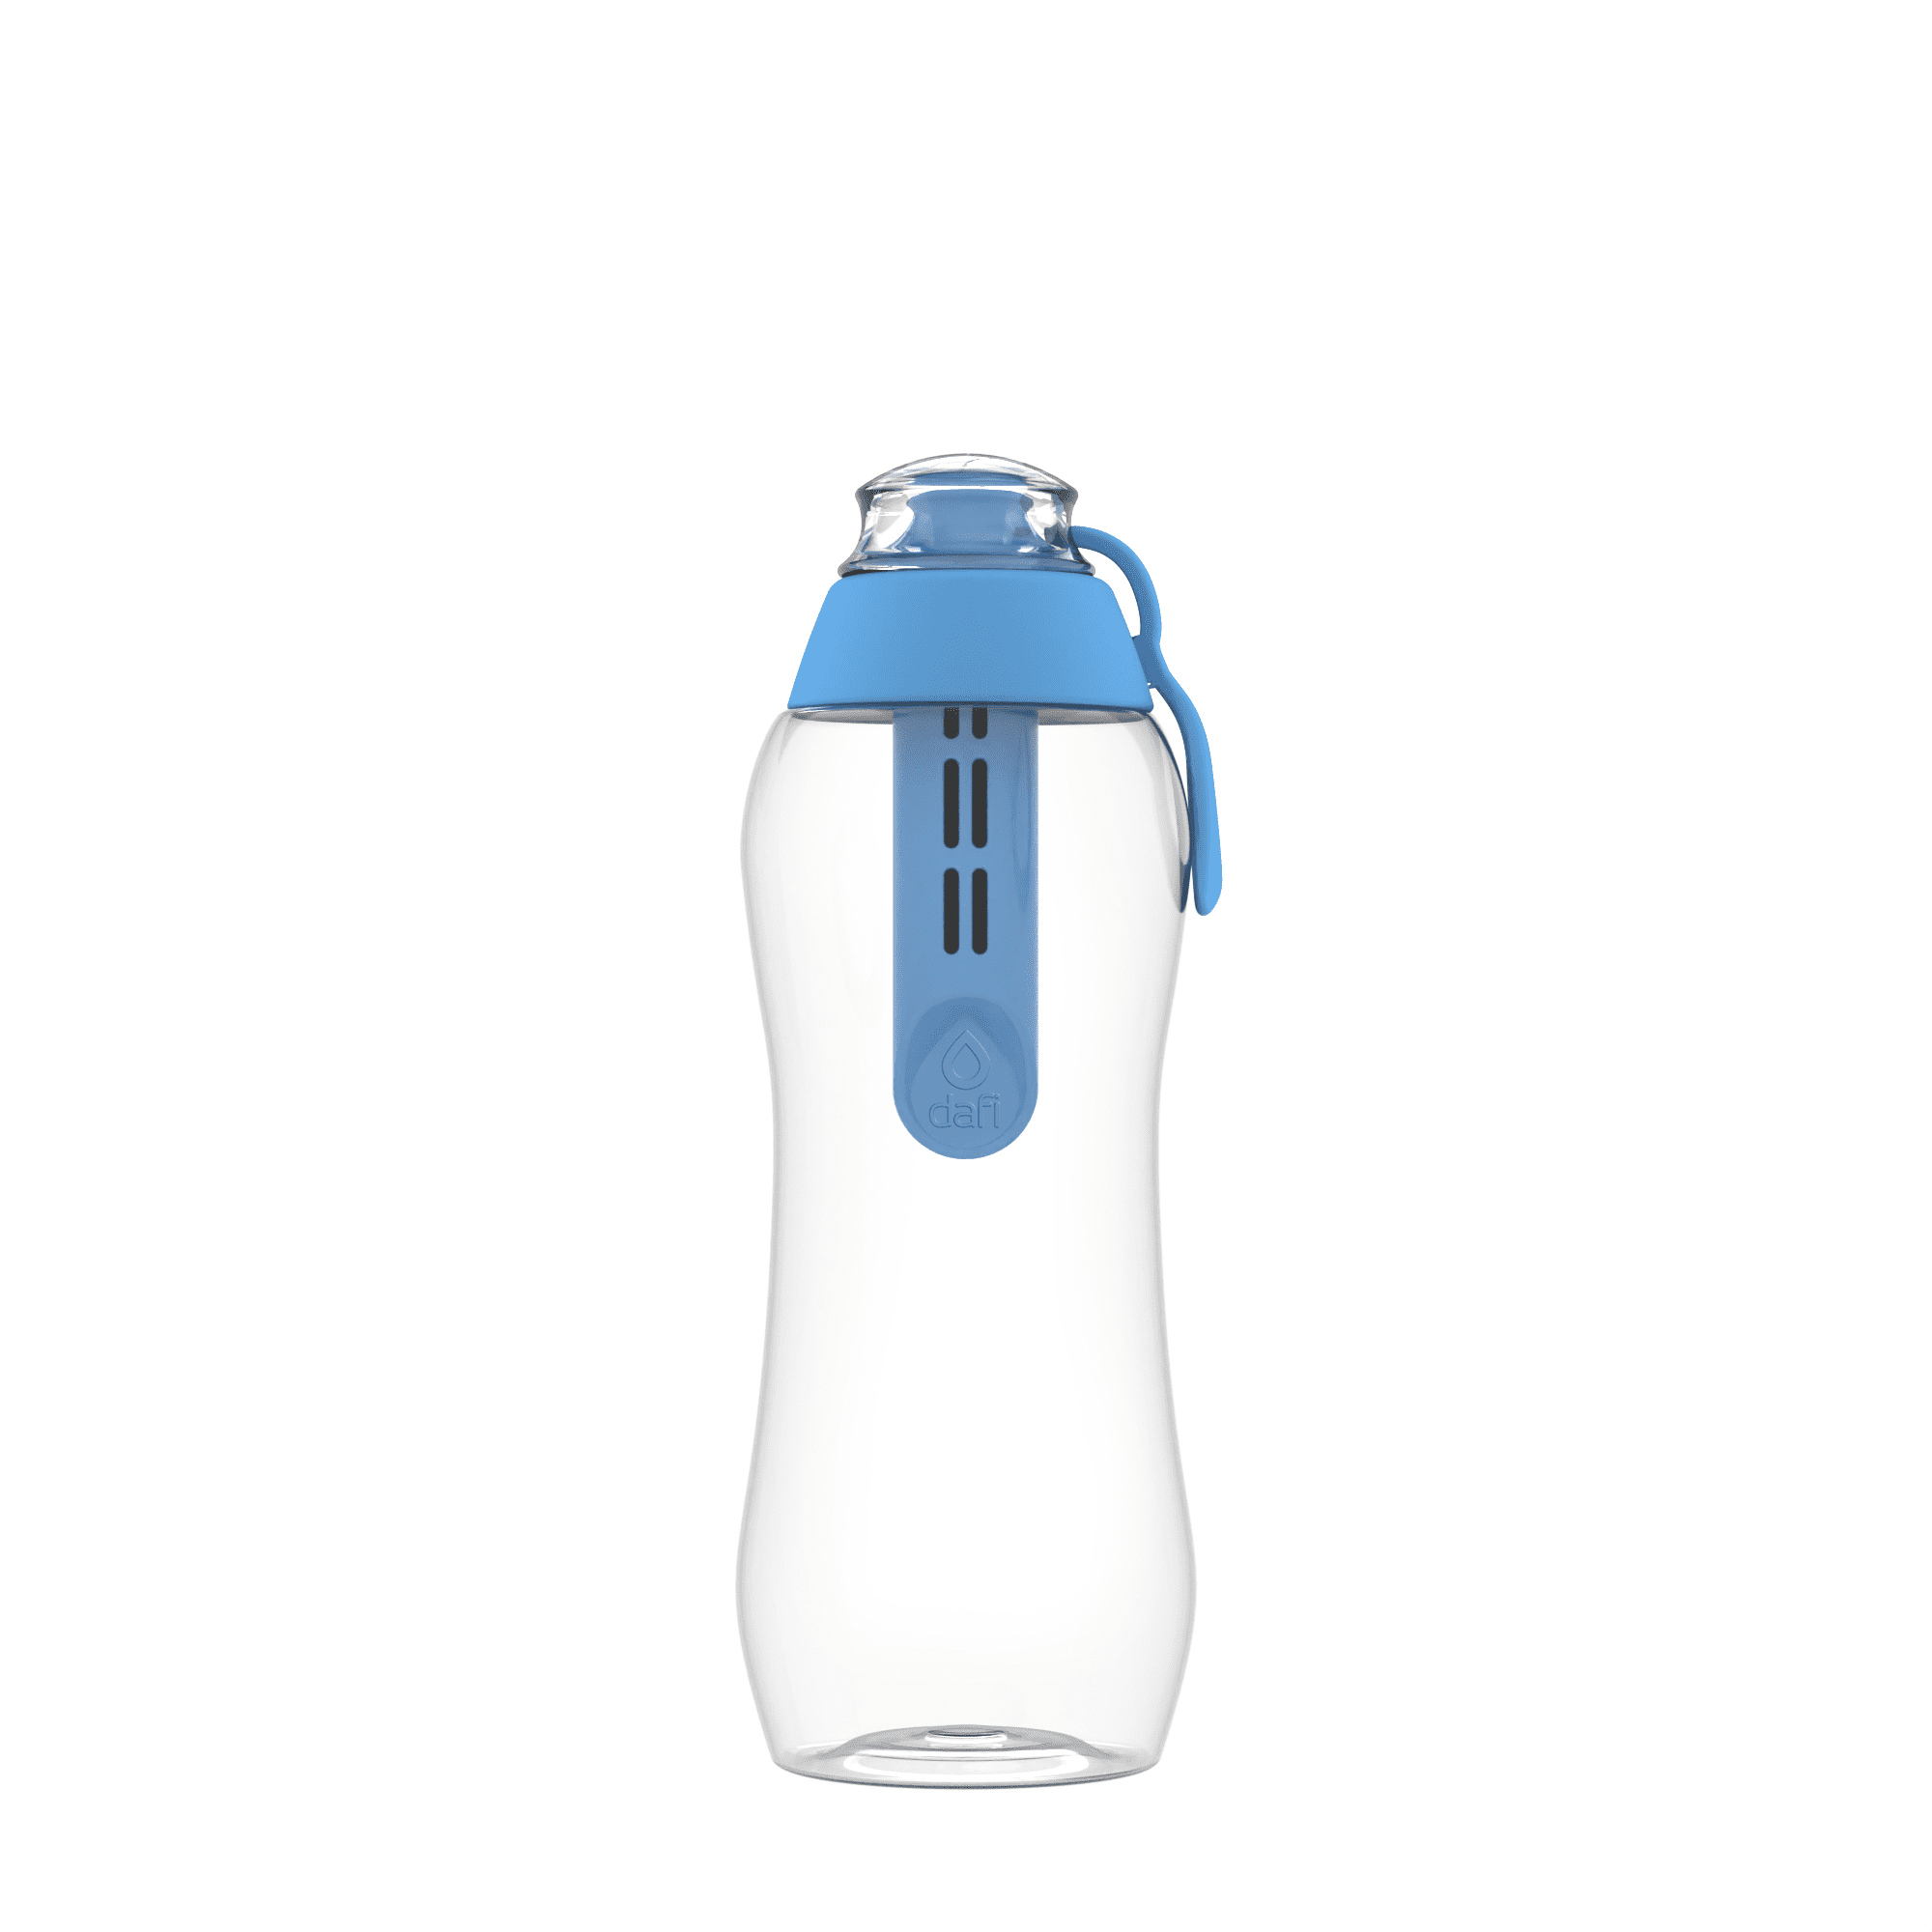 22 oz Stainless steel Water Bottle Starter Kit with Blue Lid and 2 Flavor  Cartridges (Fruit Punch & Mixed Berry)